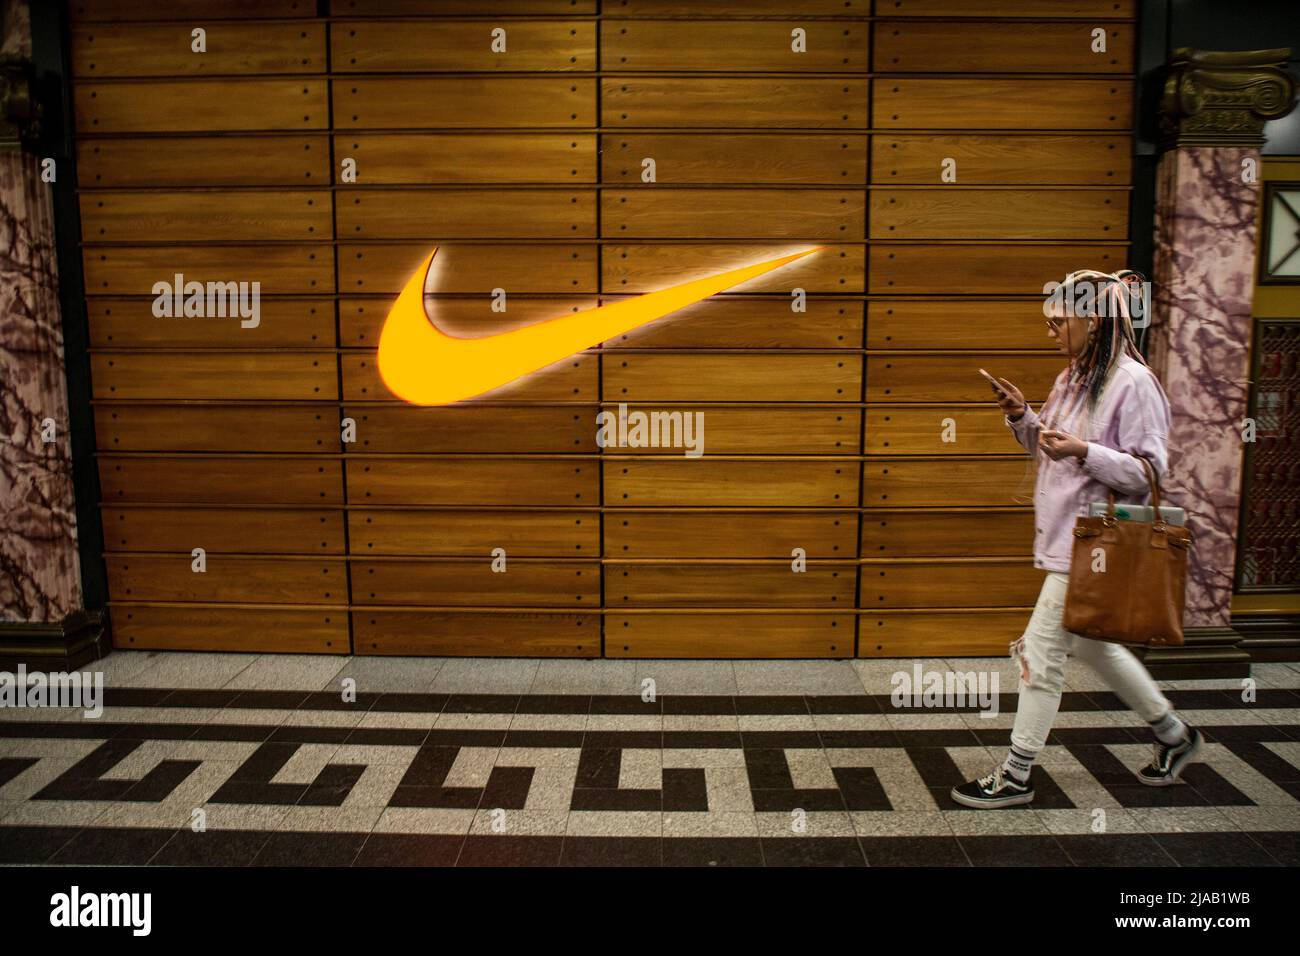 Moscow, Russia. 29th May, 2022. A woman walks past a Nike store the Okhotny shopping centre, in Moscow, Russia. The American clothing and footwear manufacturer Nike has decided to leave